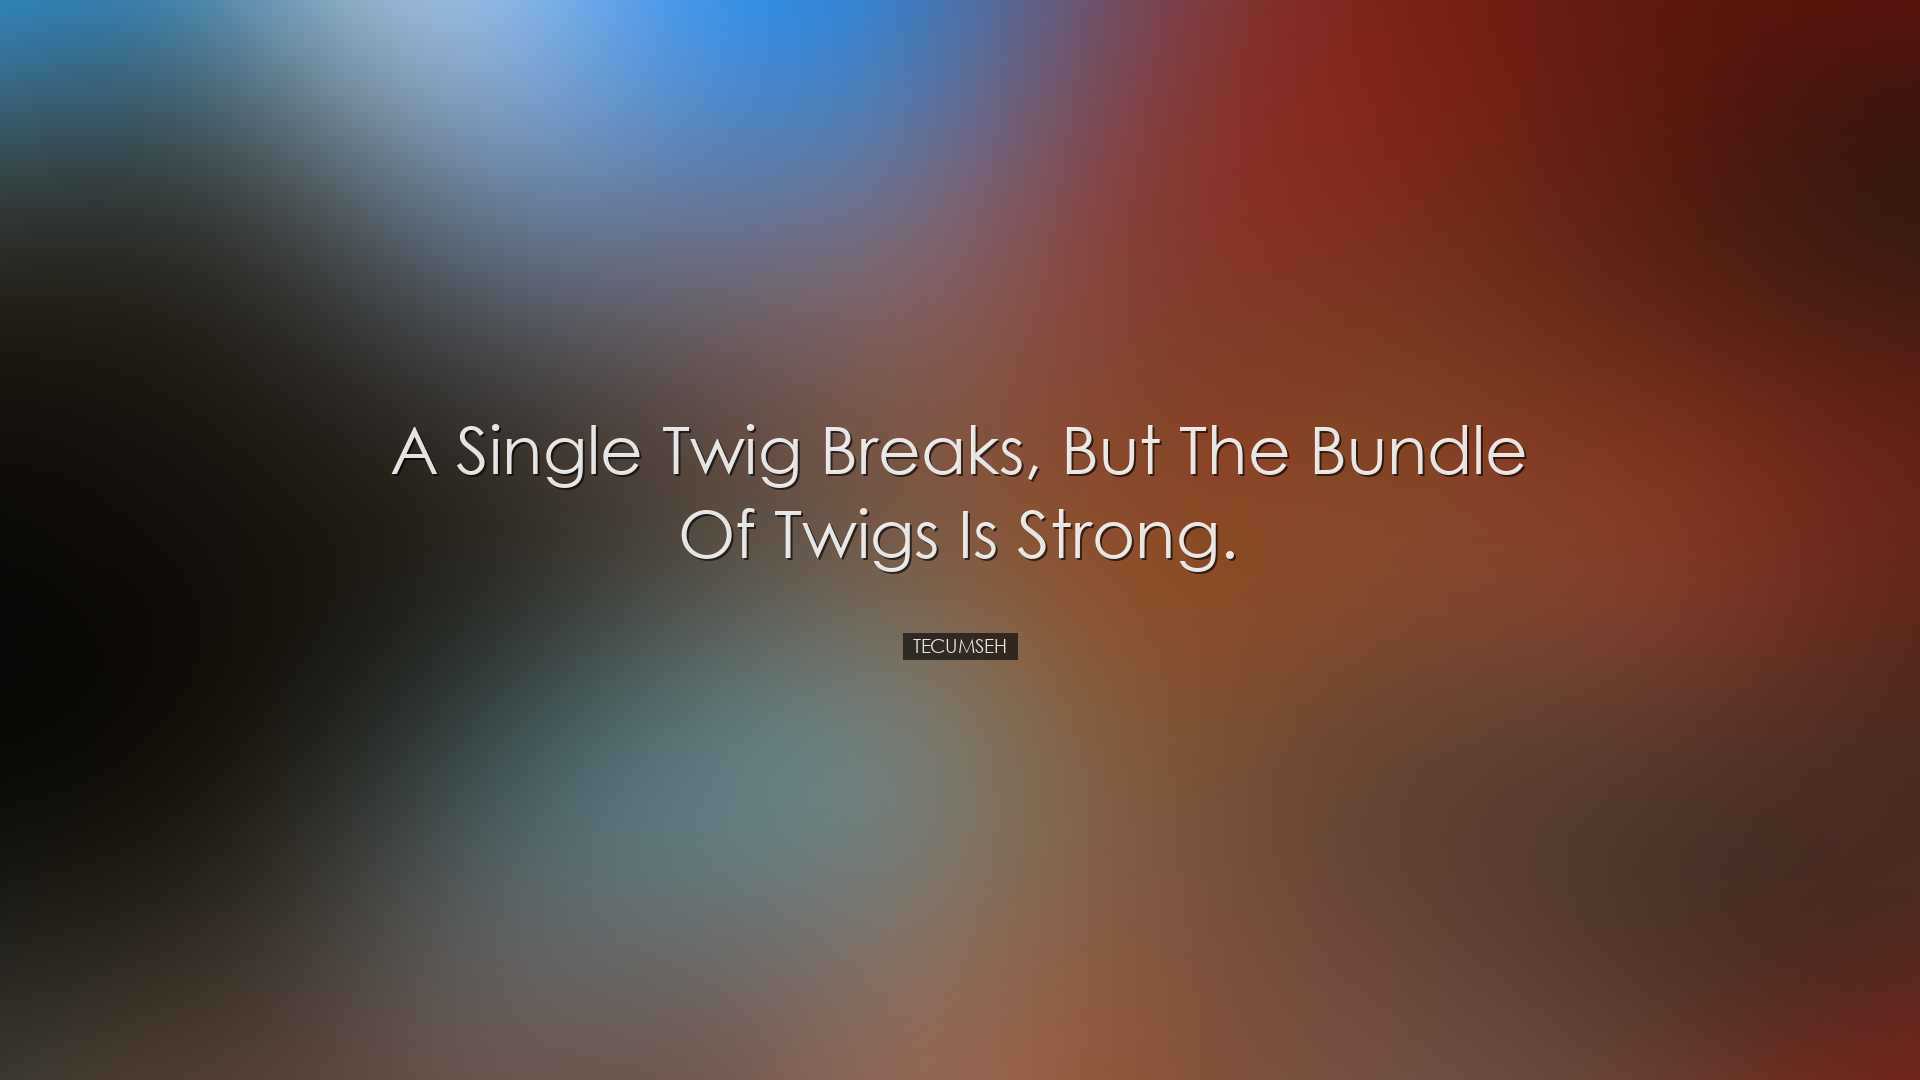 A single twig breaks, but the bundle of twigs is strong. - Tecumse